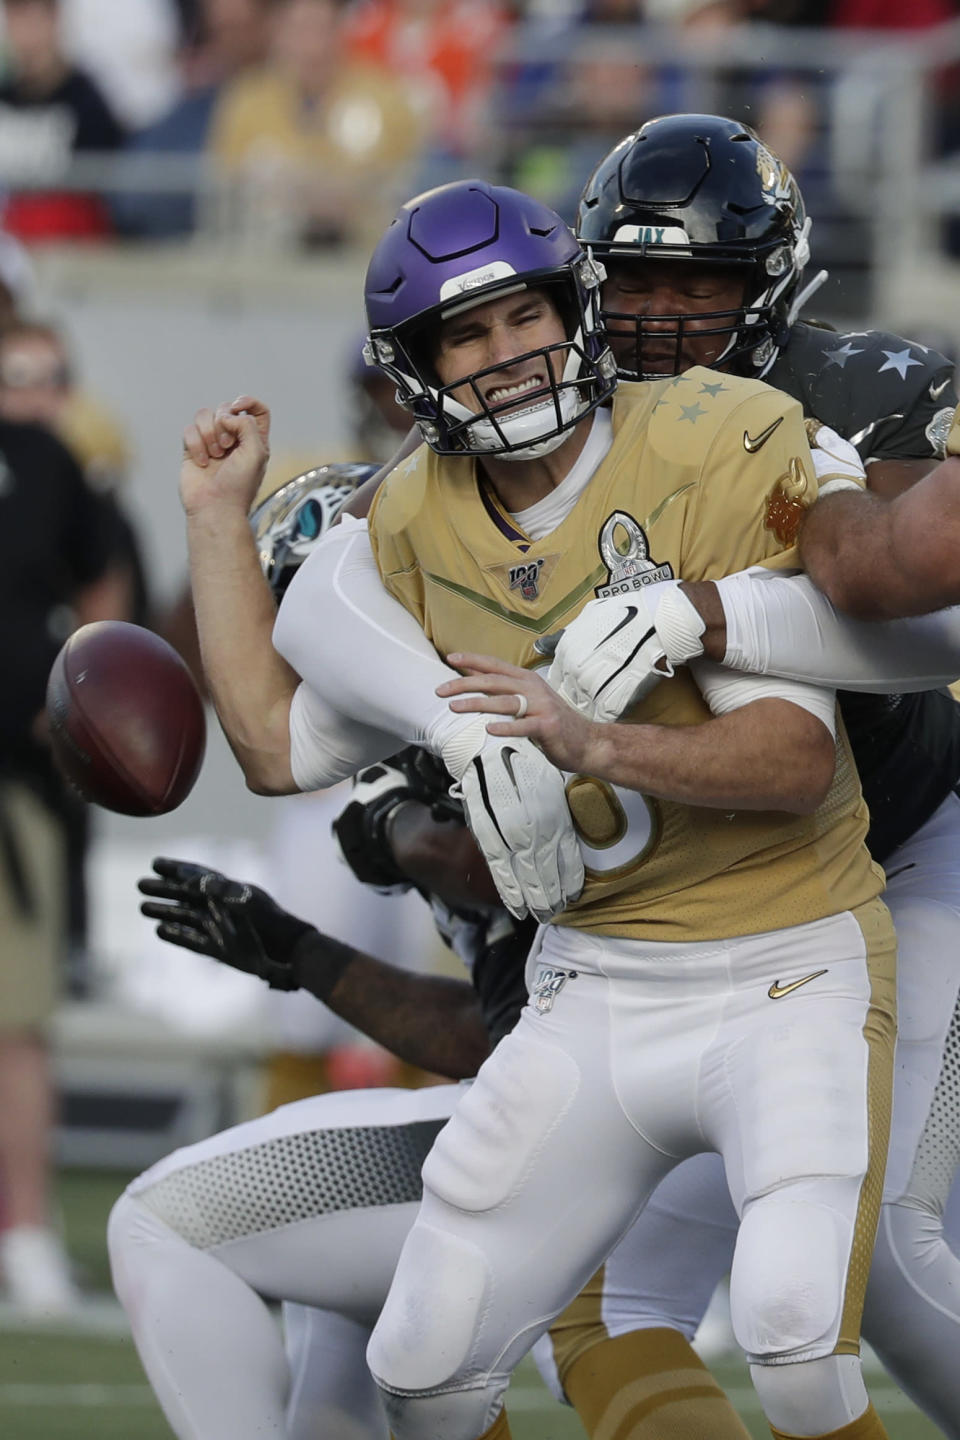 AFC defensive end Calais Campbell, of the Jacksonville Jaguars, (93) sacks NFC quarterback Kirk Cousins, of the Minnesota Vikings, and fumbles the ball, during the second half of the NFL Pro Bowl football game, Sunday, Jan. 26, 2020, in Orlando, Fla. (AP Photo/John Raoux)